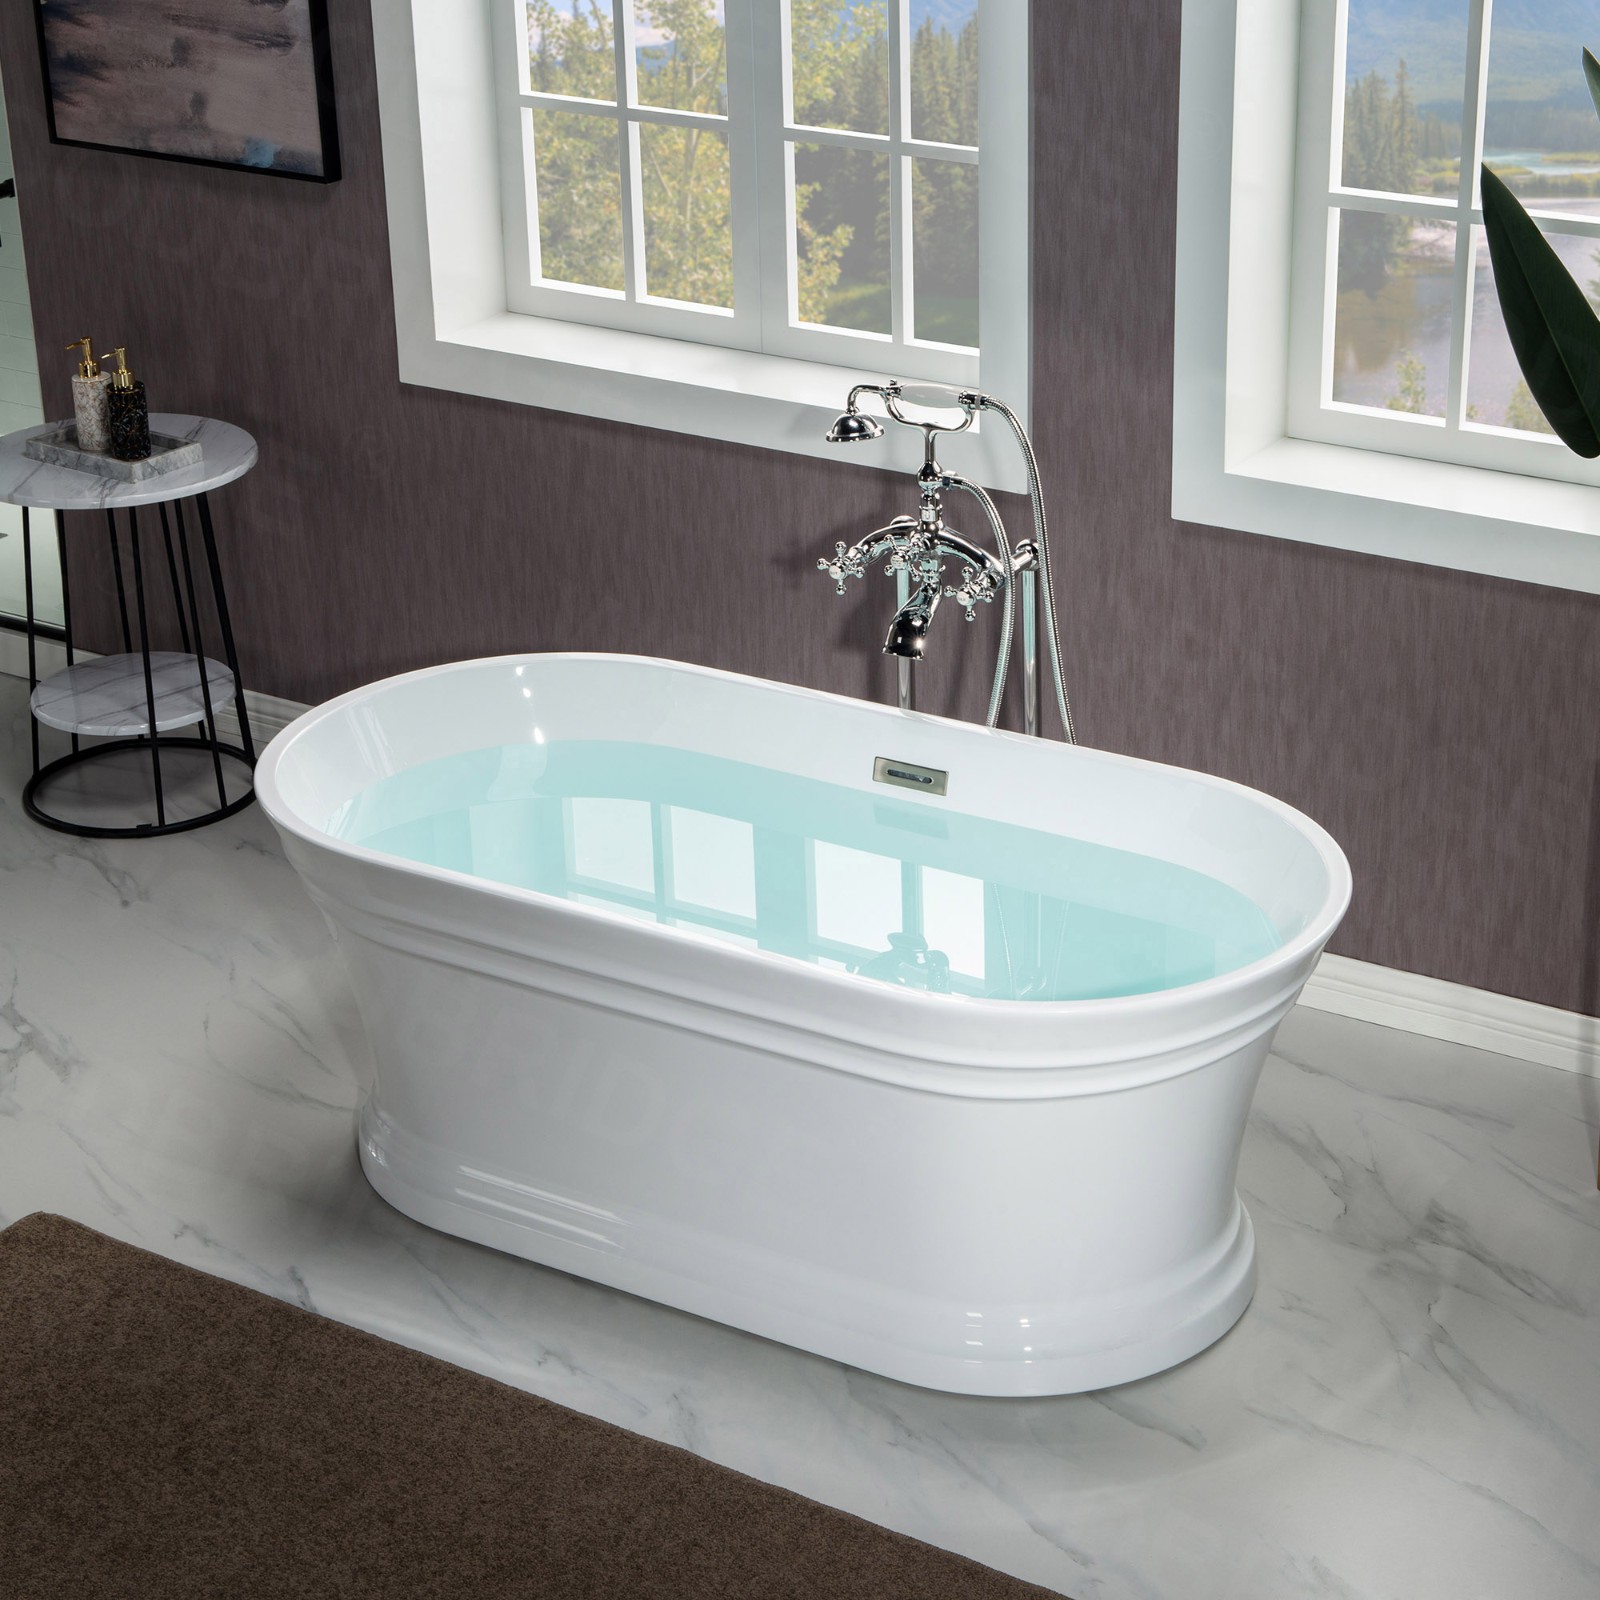  WOODBRIDGE 67 in. Freestanding Double Ended Acrylic Soaking Bathtub with Center Drain Assembly and Overflow, BTA1537/B1537, Glossy White_7757